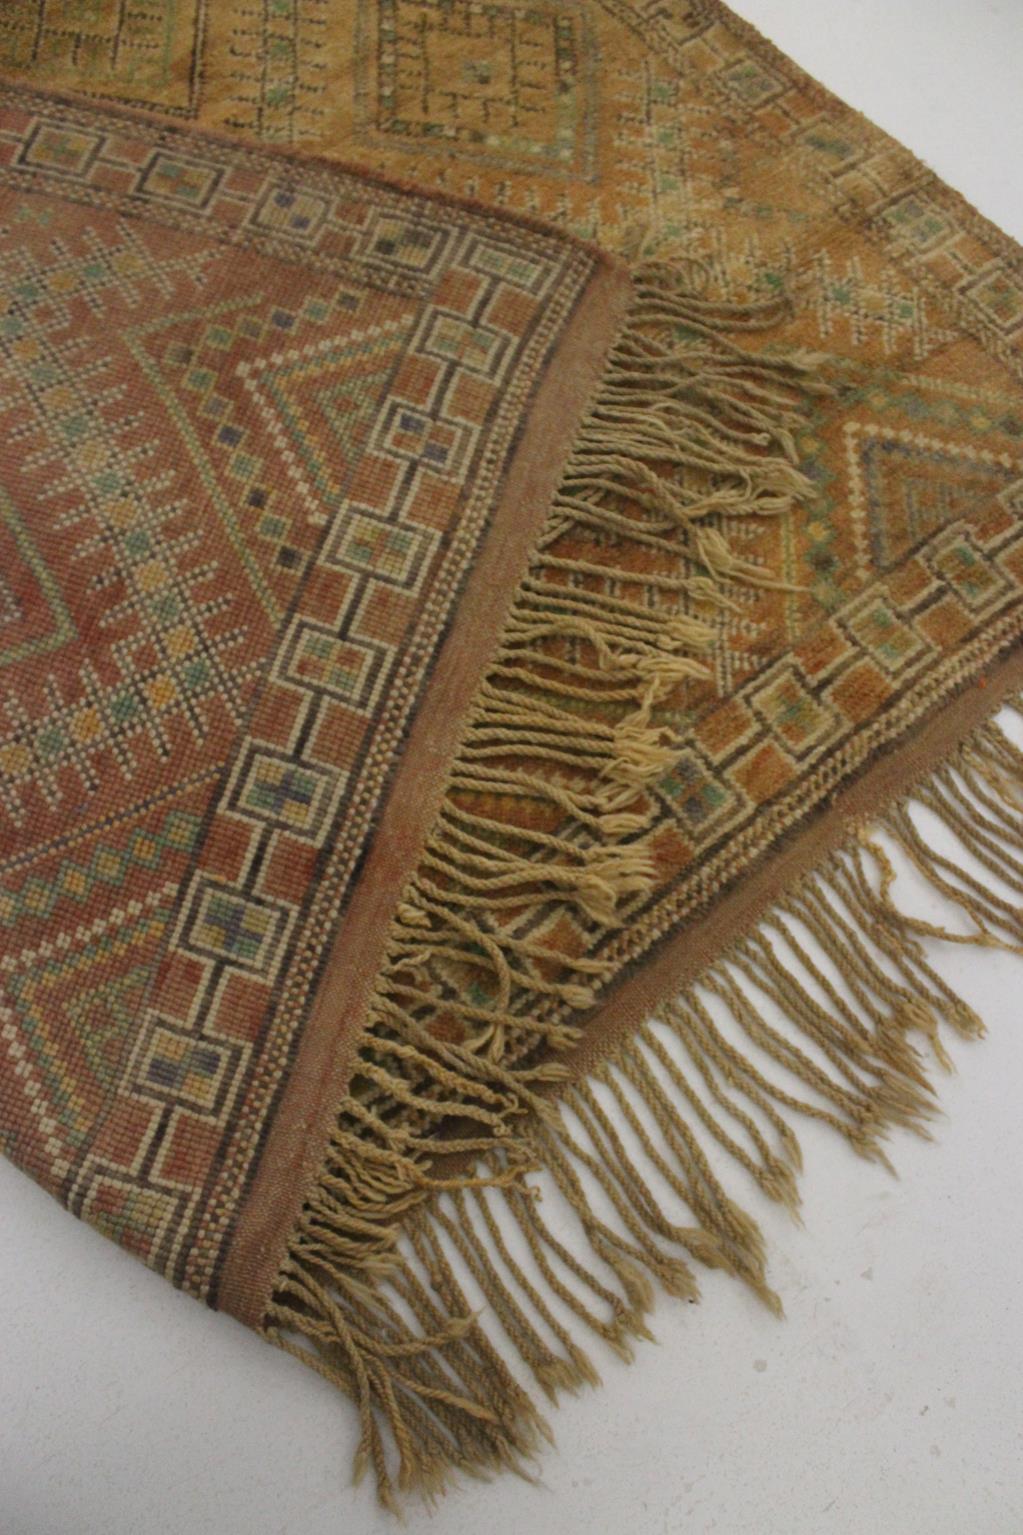 Vintage Moroccan Zemmour rug - Ochre - 6x11.3feet / 185x345cm For Sale 8